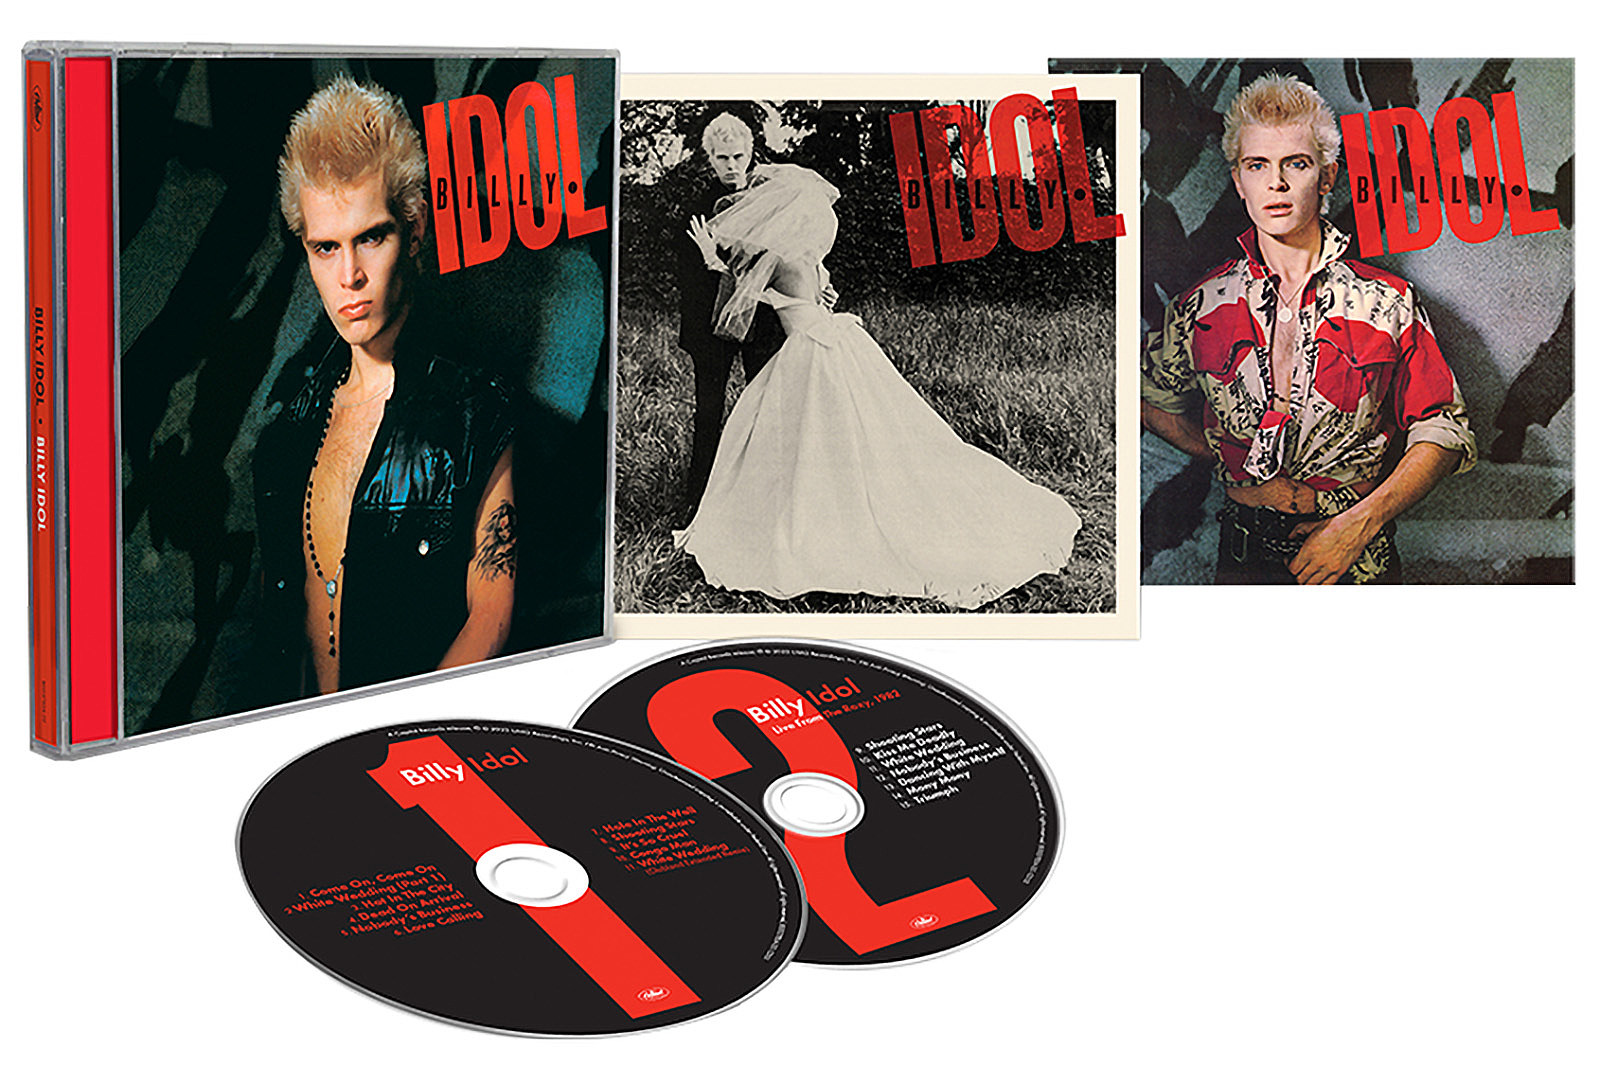 Billy Idol Adds 1982 Live Album to Expanded Edition of His Debut